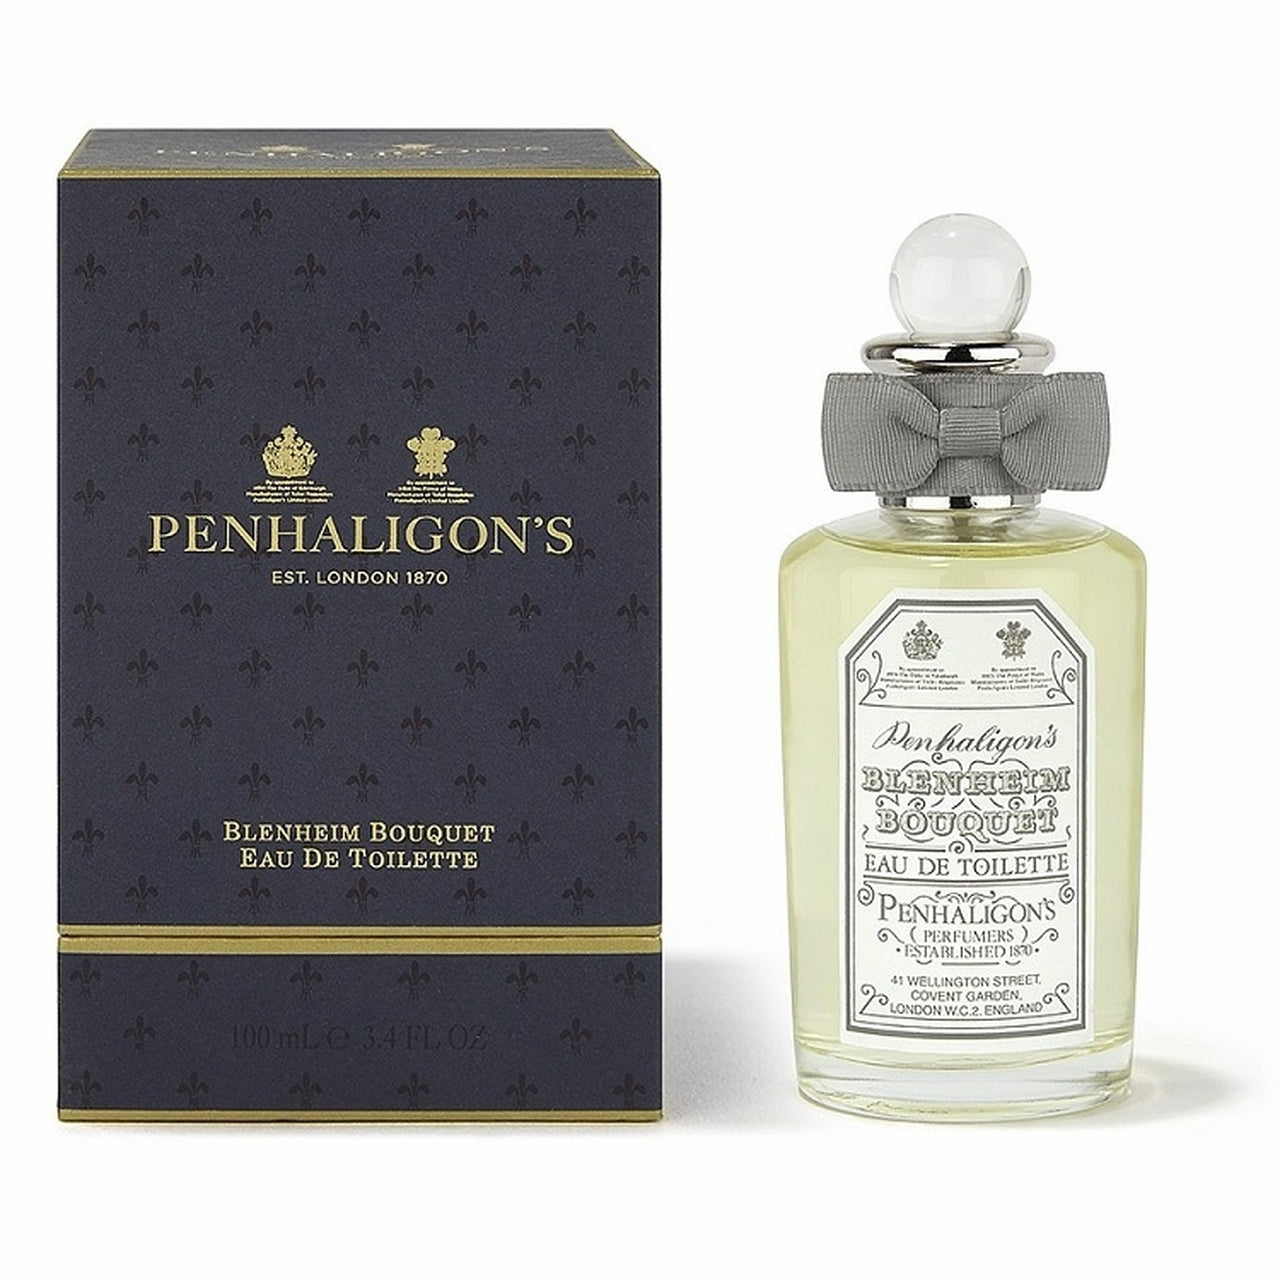 Blenheim Bouquet by Penhaligon's Cologne. Dressed up in a decorative bottle and sporting a dashing bow tie fitting of a creation date of 1902, this men's fragrance from Penhaligon's puts the finishing splash of panache on any ensemble. Blenheim Bouquet features top notes of vibrant lemon and zesty lime, rounded out with the clean scent of lavender. Woody pine and earthy black pepper provide the base notes for this refreshing blend. This light, citrusy fragrance is the perfect addition to an afternoon in the park or a twilight stroll on the beach.